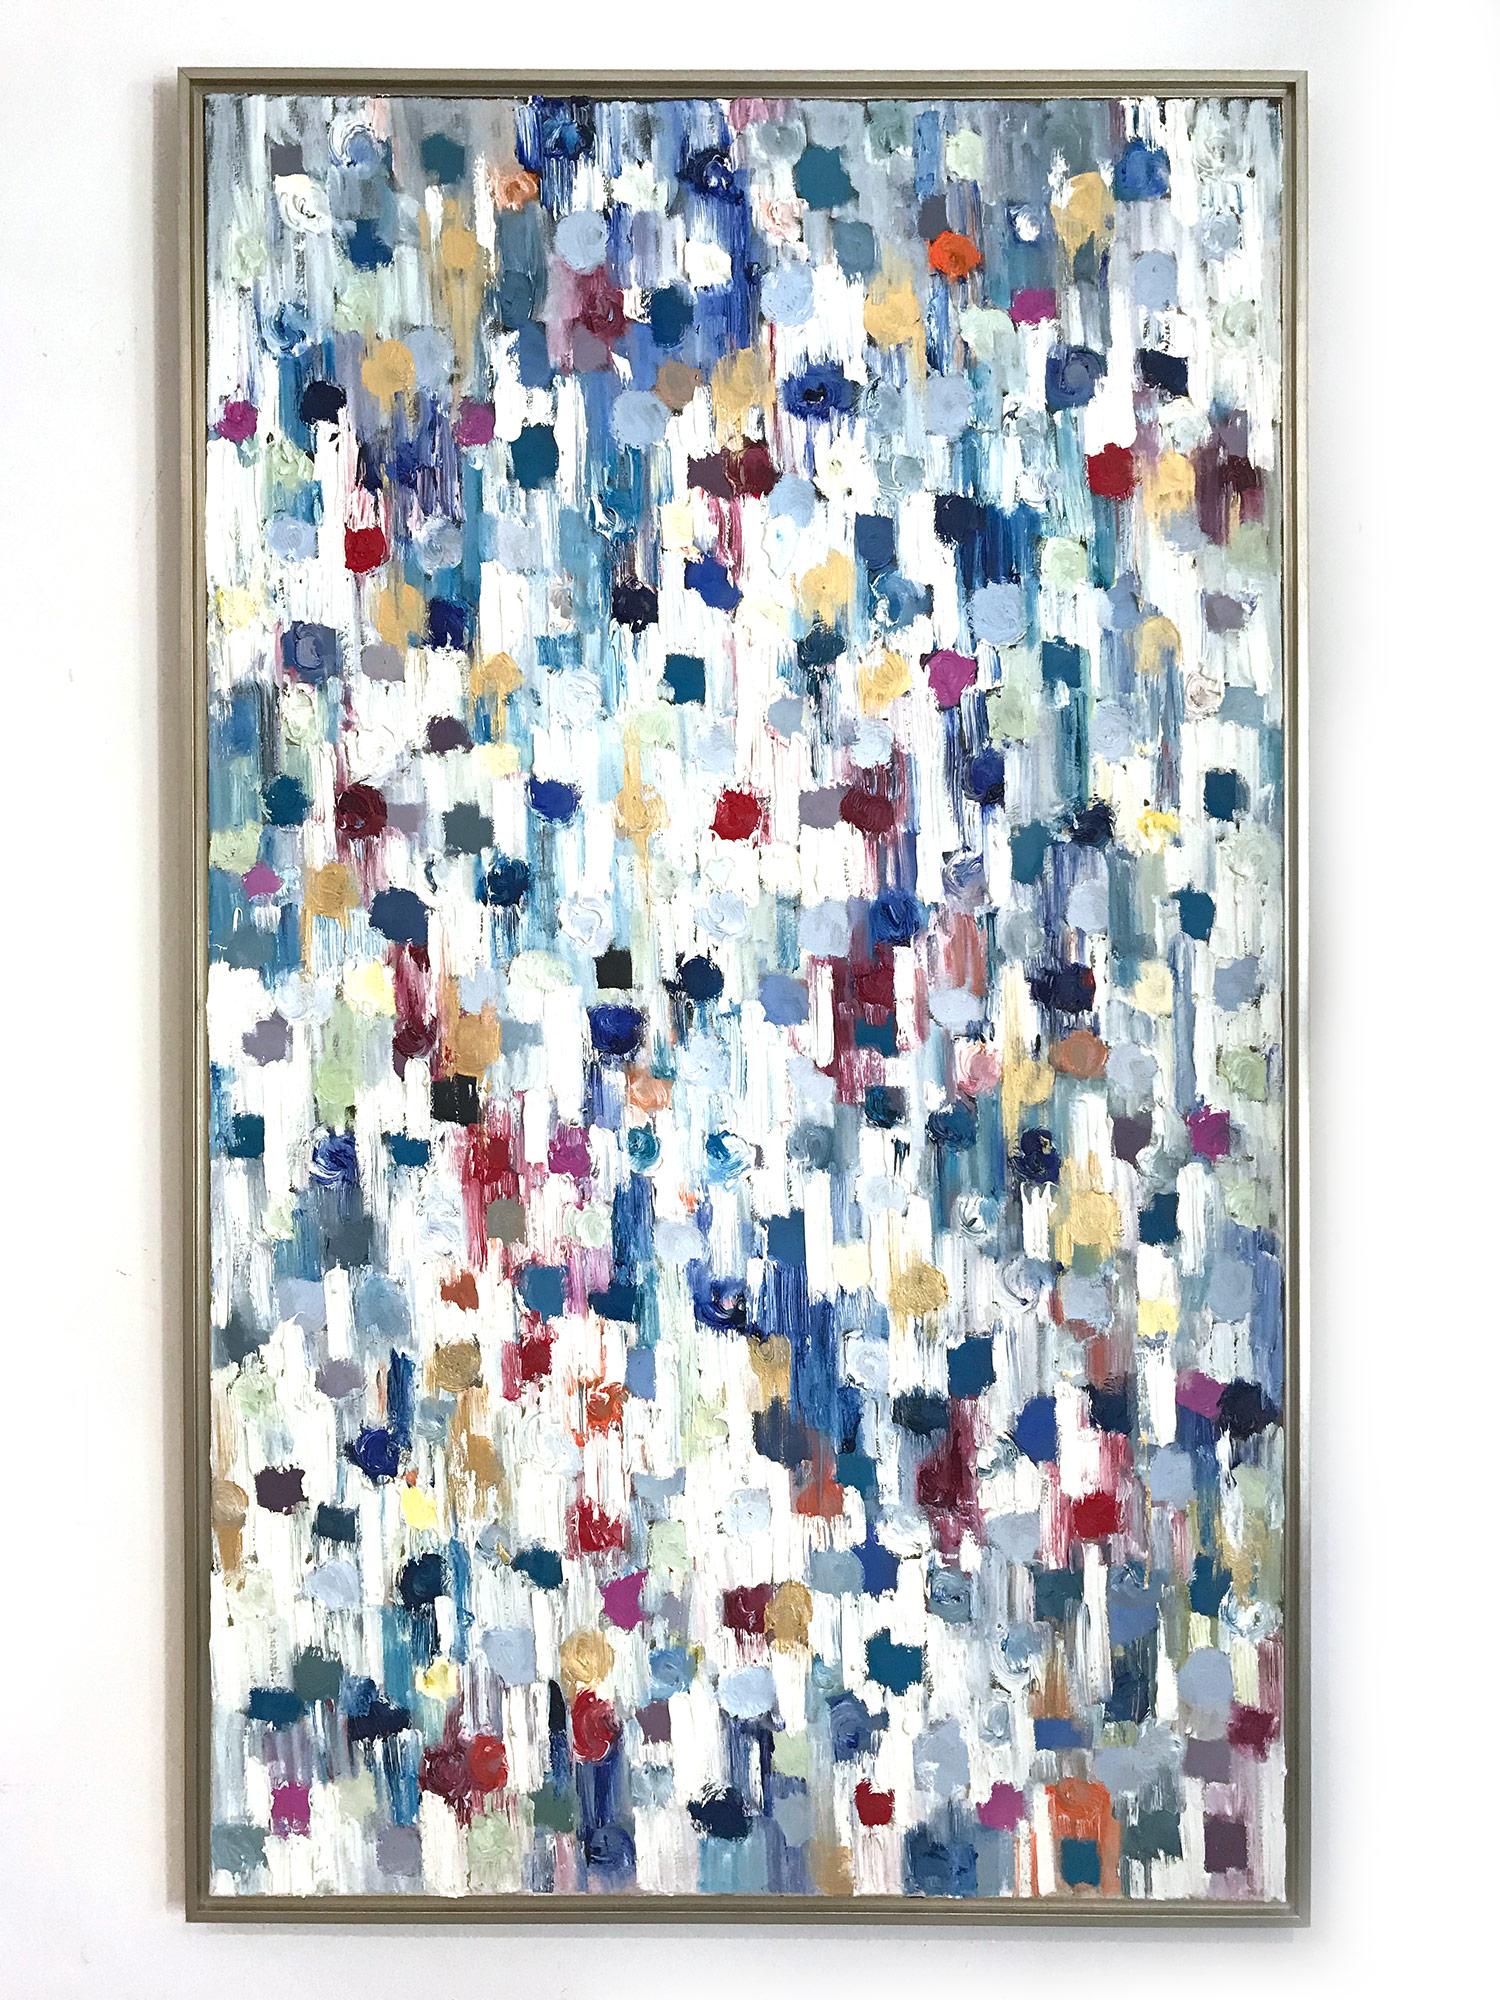 Dripping Dots - The Citadel, Colorful, Abstract, Oil Painting 12